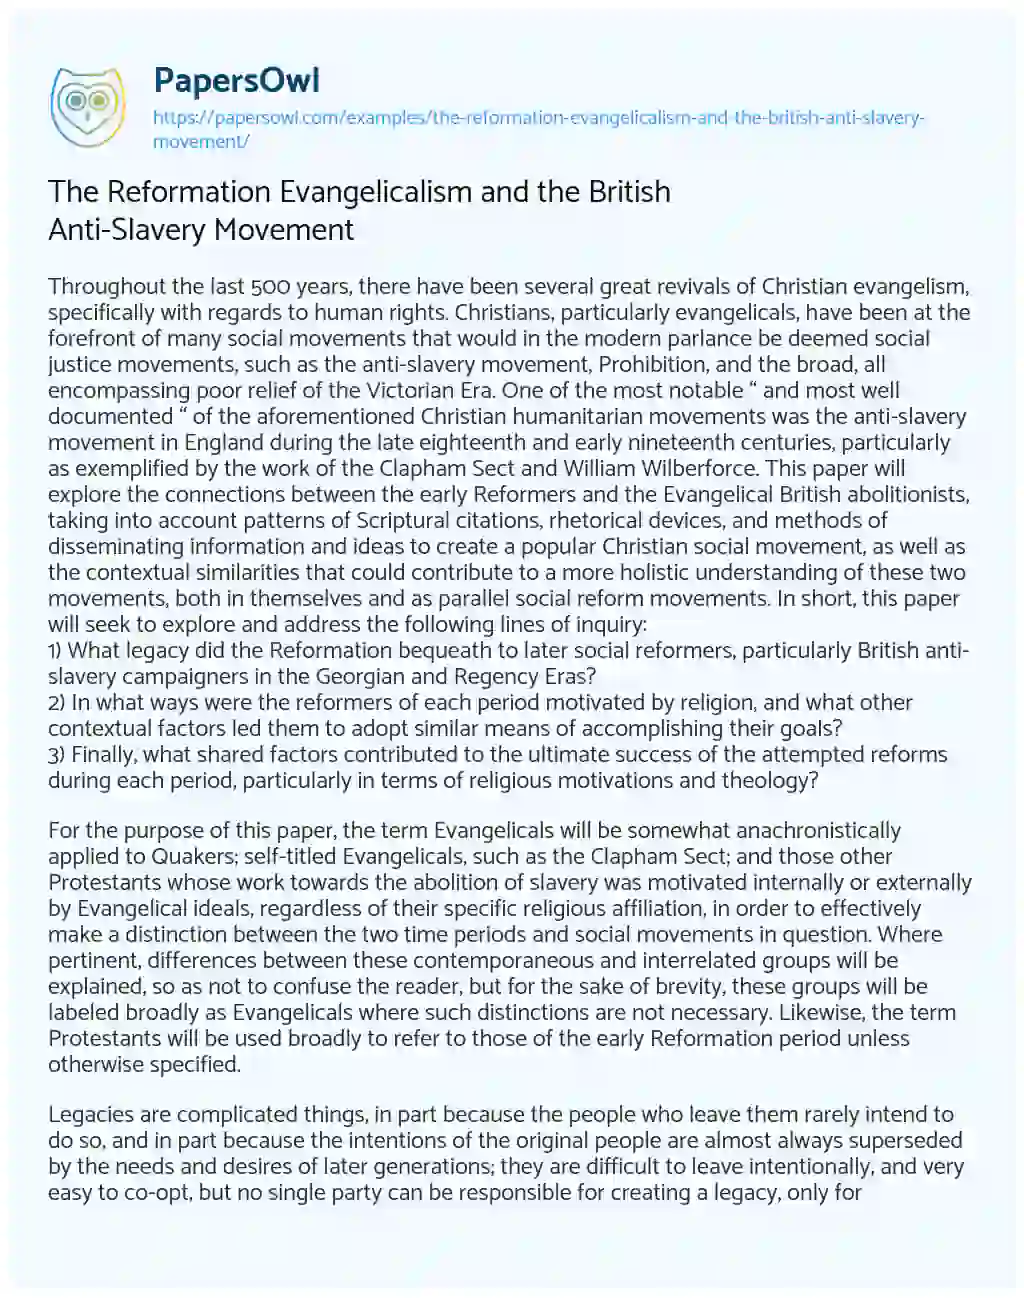 Essay on The Reformation Evangelicalism and the British Anti-Slavery Movement